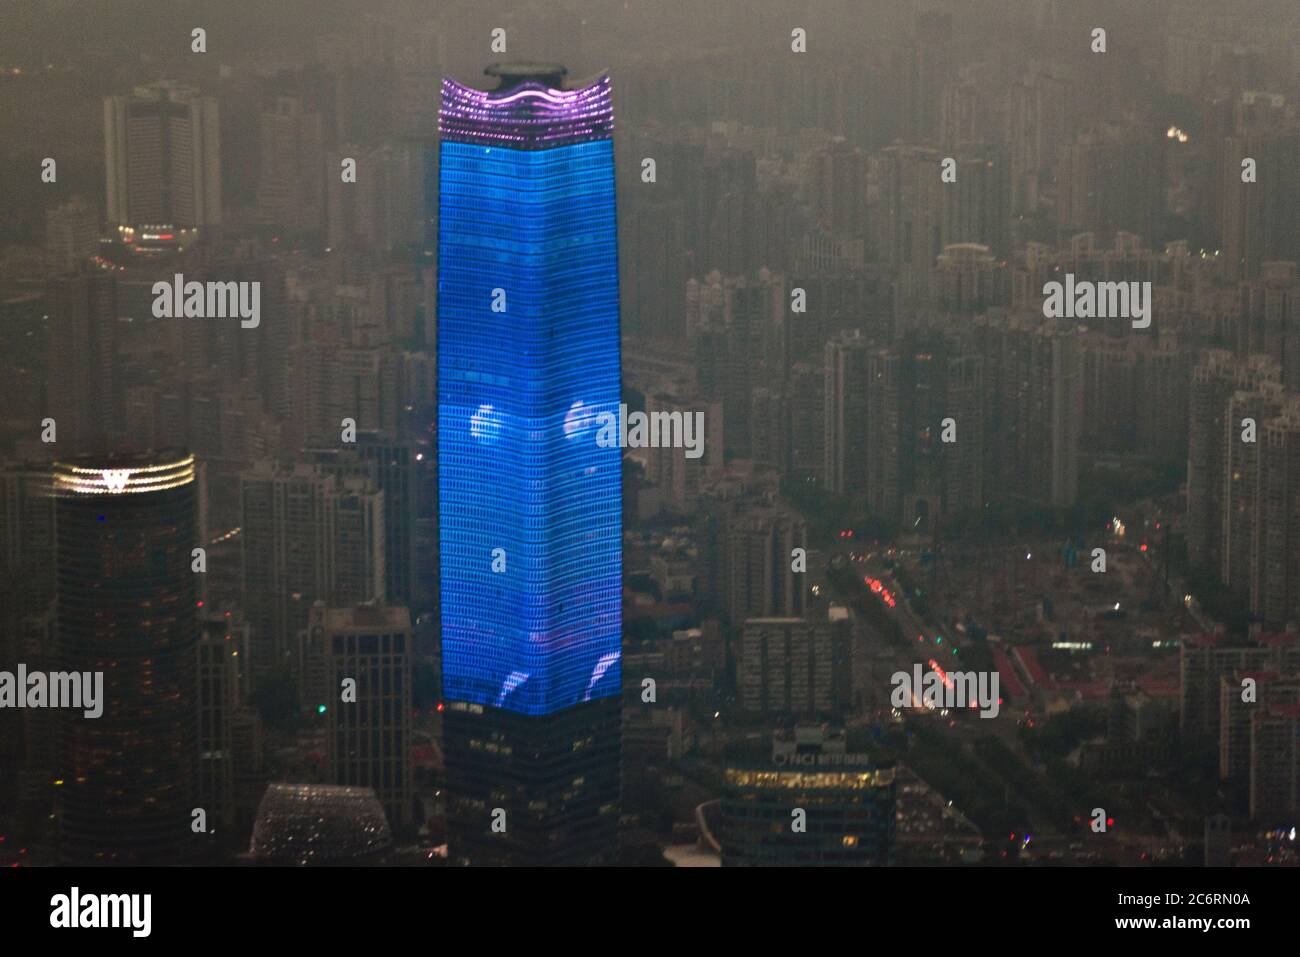 Shanghai: panoramic view of the Huangpu district at night from the top of Shanghai Tower, with skyscraper building illuminated by LED lighting. China Stock Photo